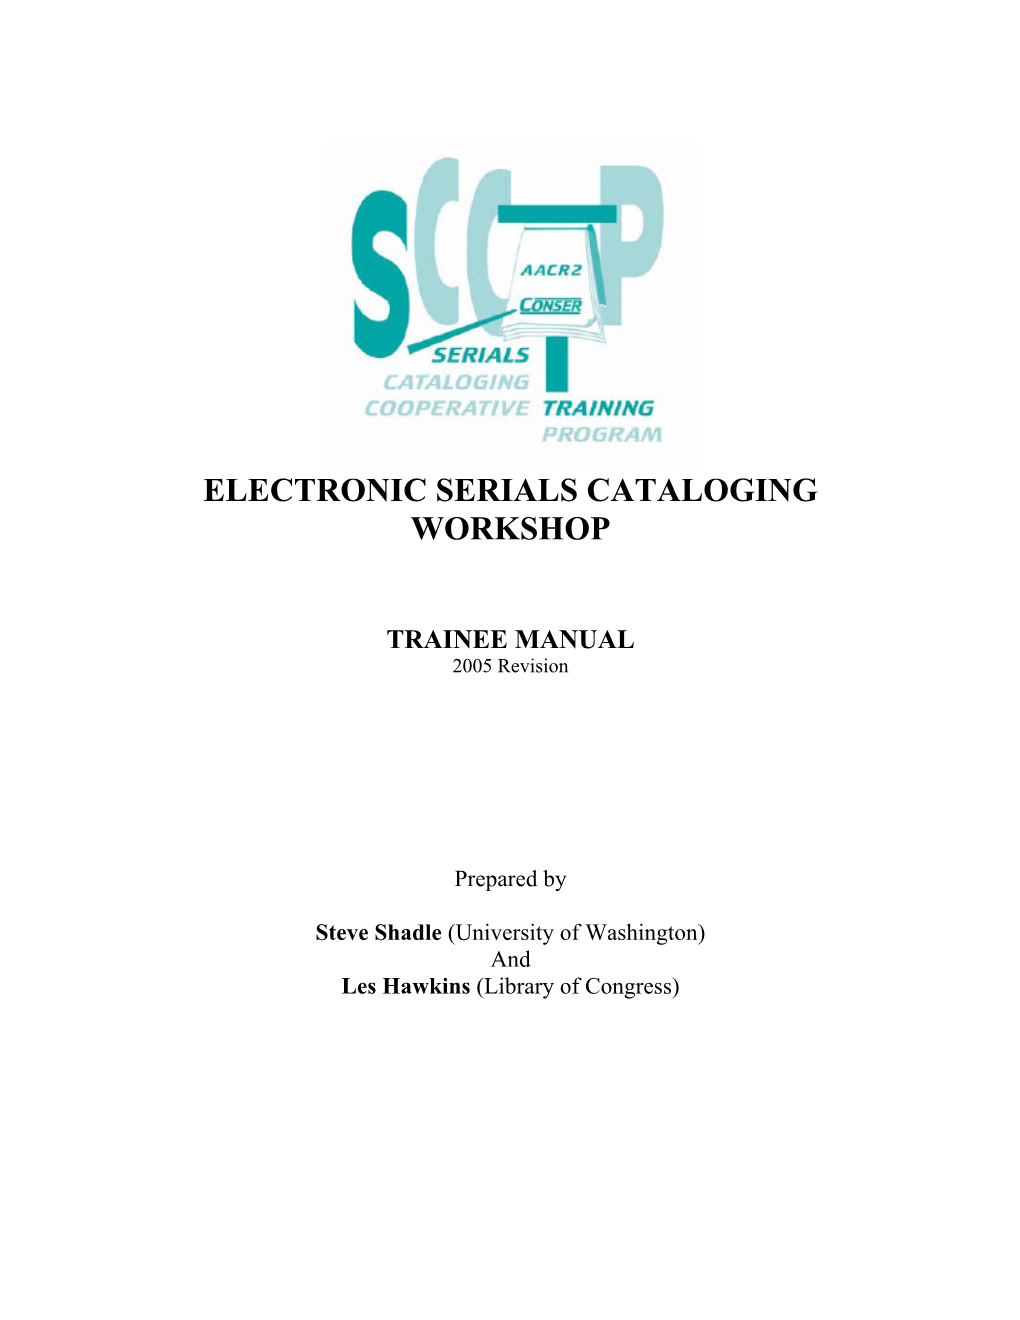 Electronic Serials Cataloging Workshop Trainee Manual